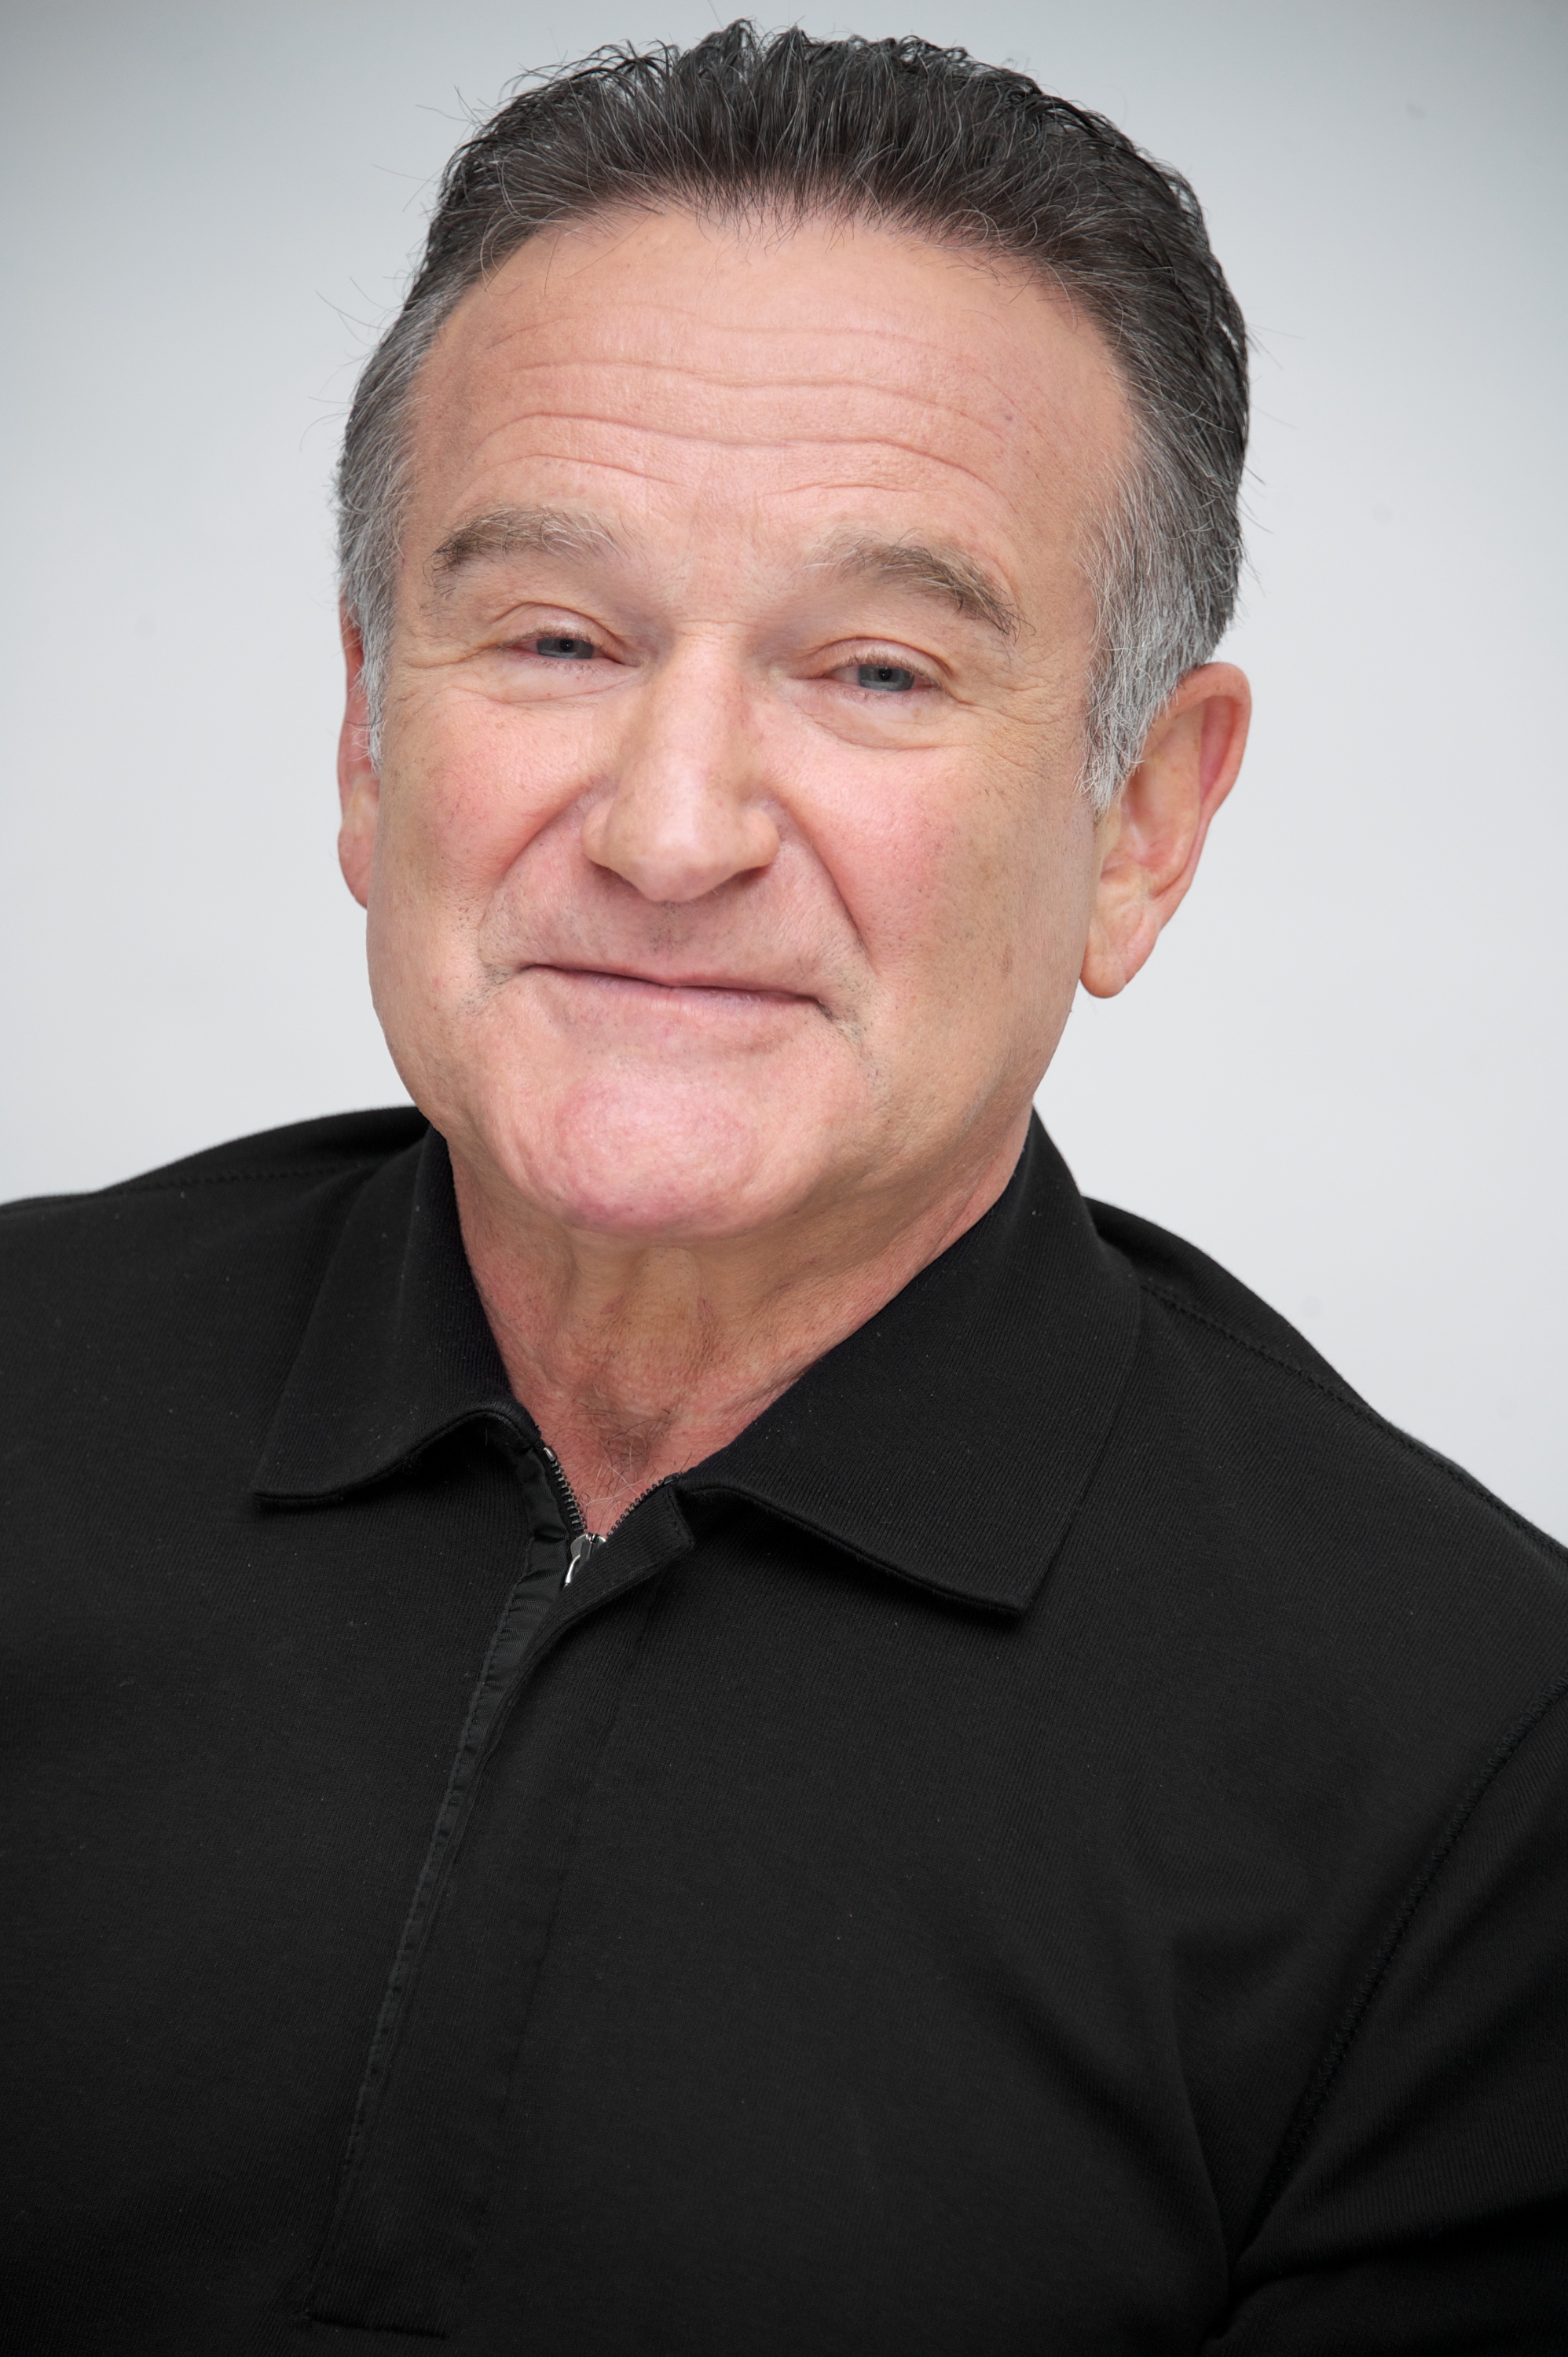 Robin Williams at "The Crazy Ones" Press Conference at the Four Seasons Hotel on October 8, 2013 in Beverly Hills.